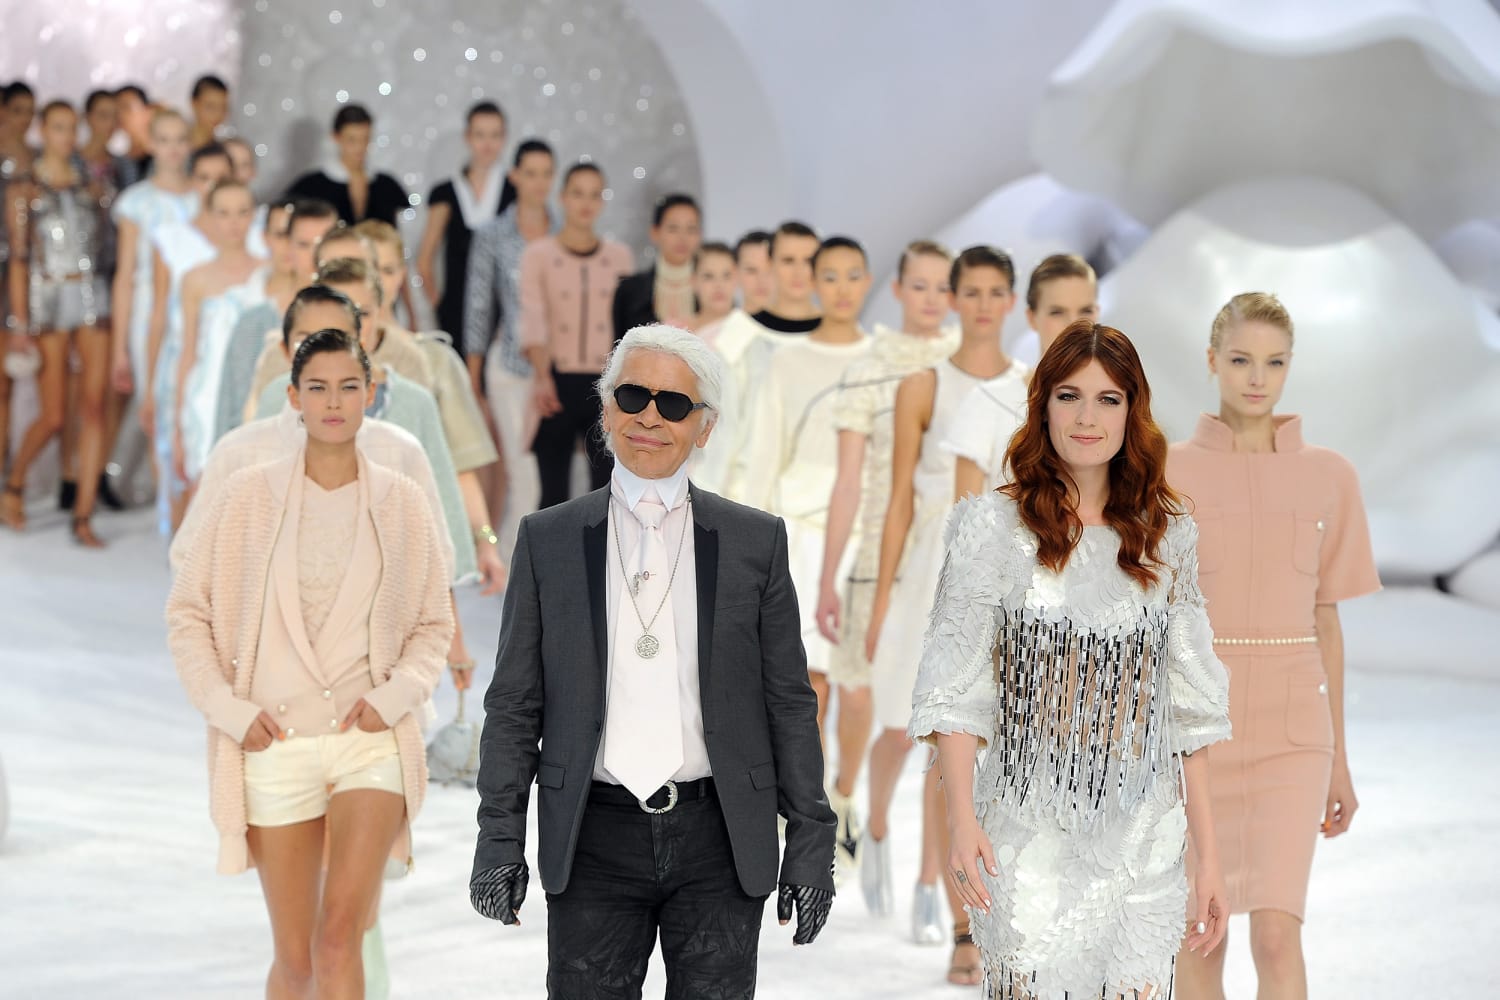 Why Met Gala 2023's Karl Lagerfeld theme is causing an uproar